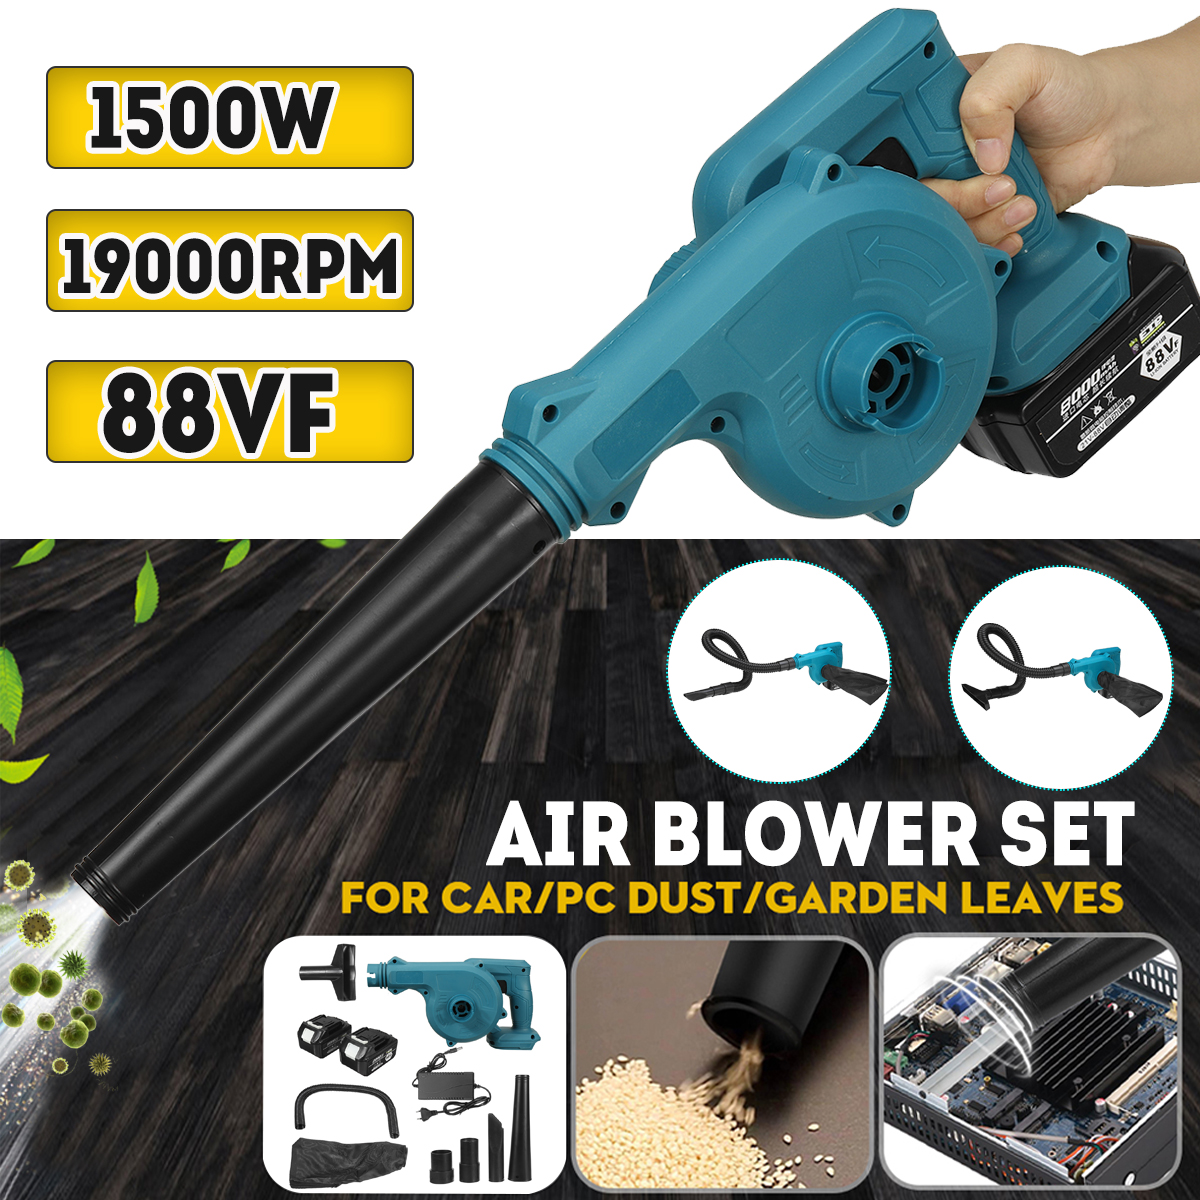 88VF-1500W-Li-ion-Battery-Air-Blower-Set-Rechargable-Cordless-Vacuum-Computer-Dust-Collecting-Tool-I-1843503-2